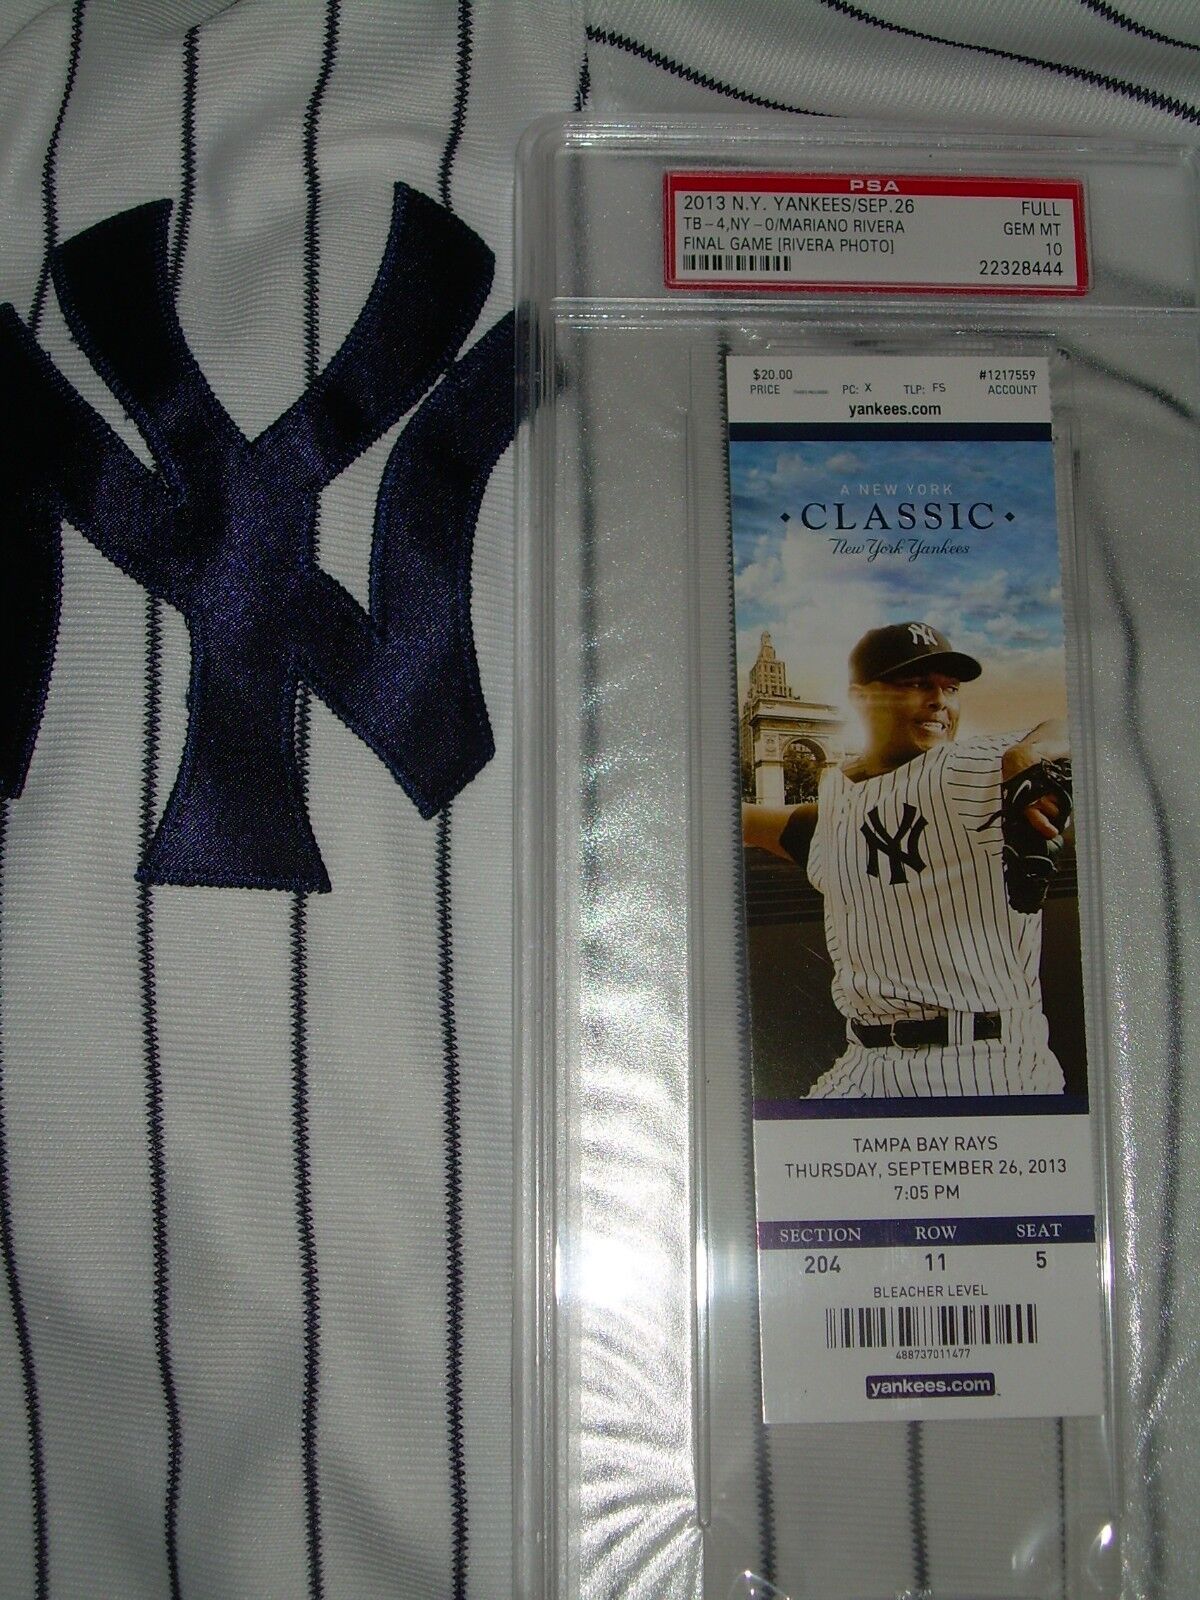 MARIANO RIVERA FINAL GAME FULL TICKET 9/26/13 YANKEES RIVERA PICTURED PSA 10 1/1